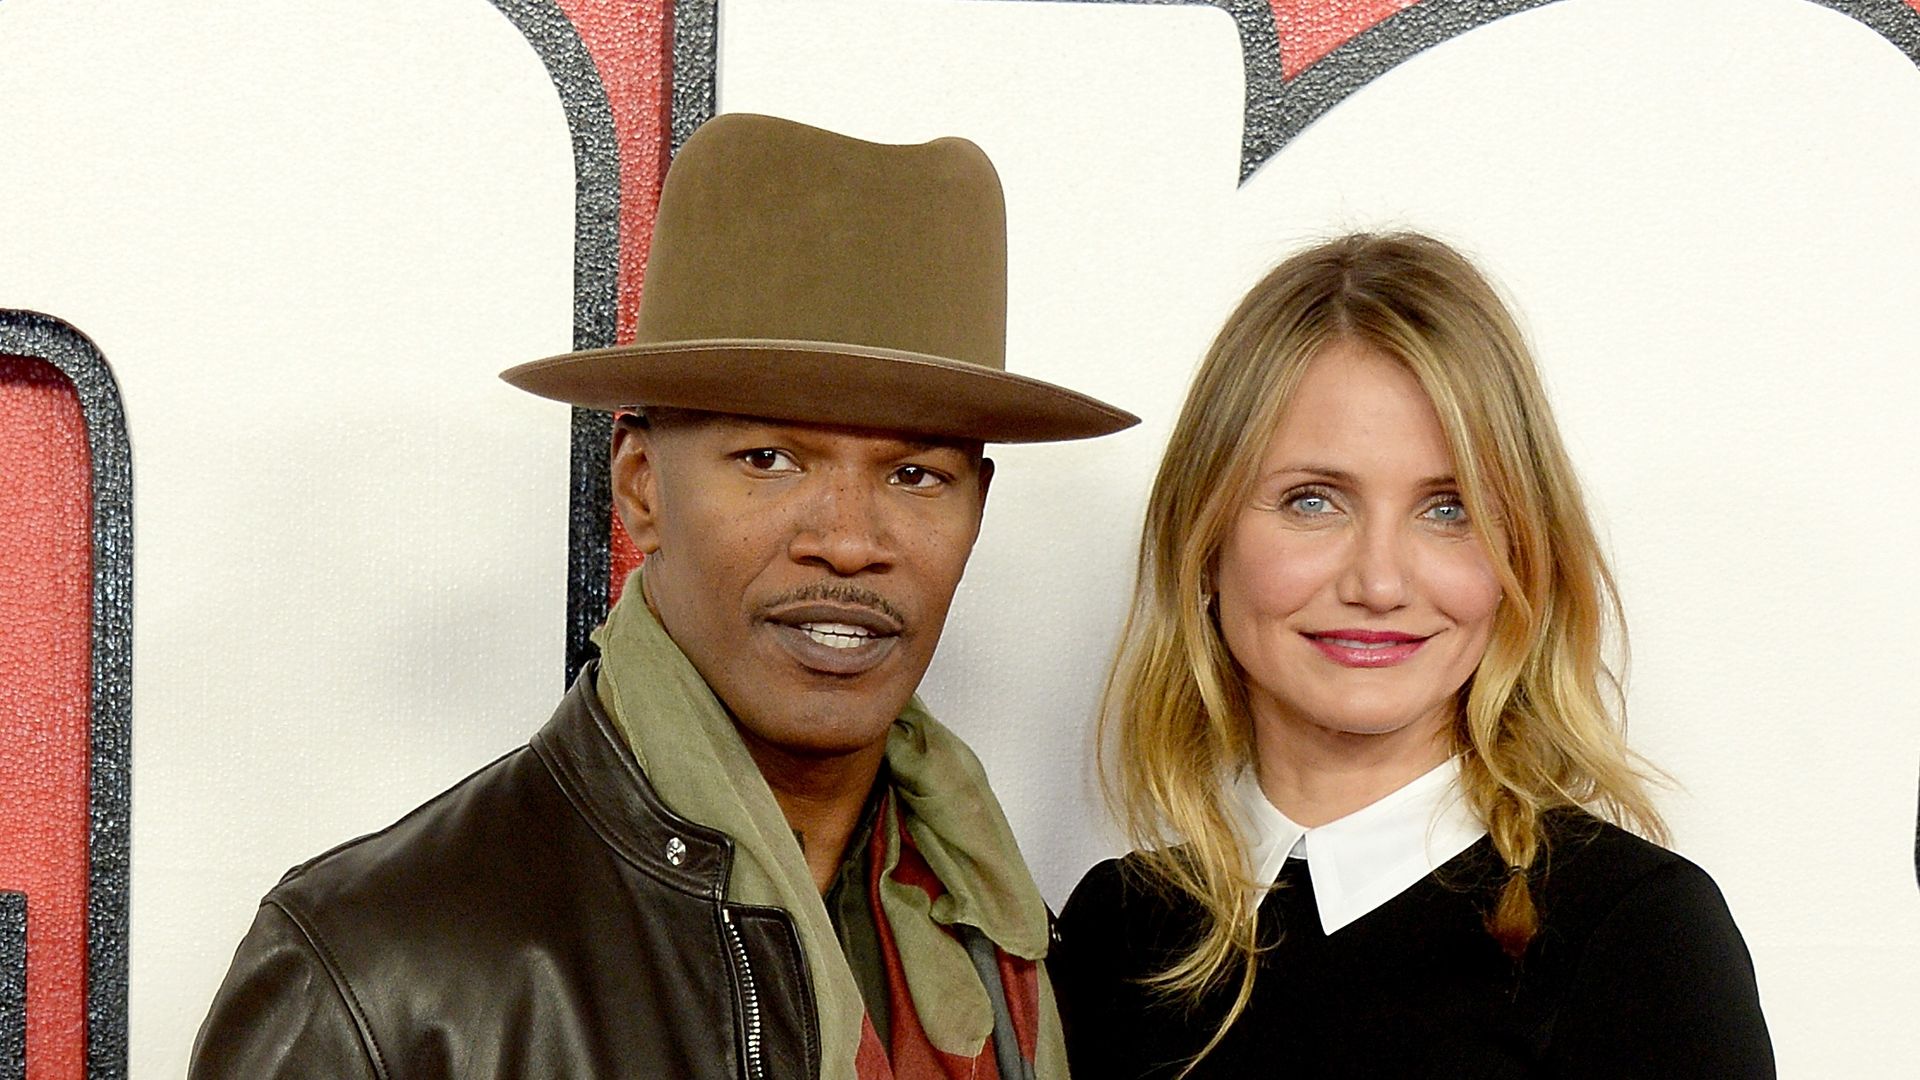 Cameron Diaz and Jamie Foxx make long-awaited Back in Action return after medical emergency